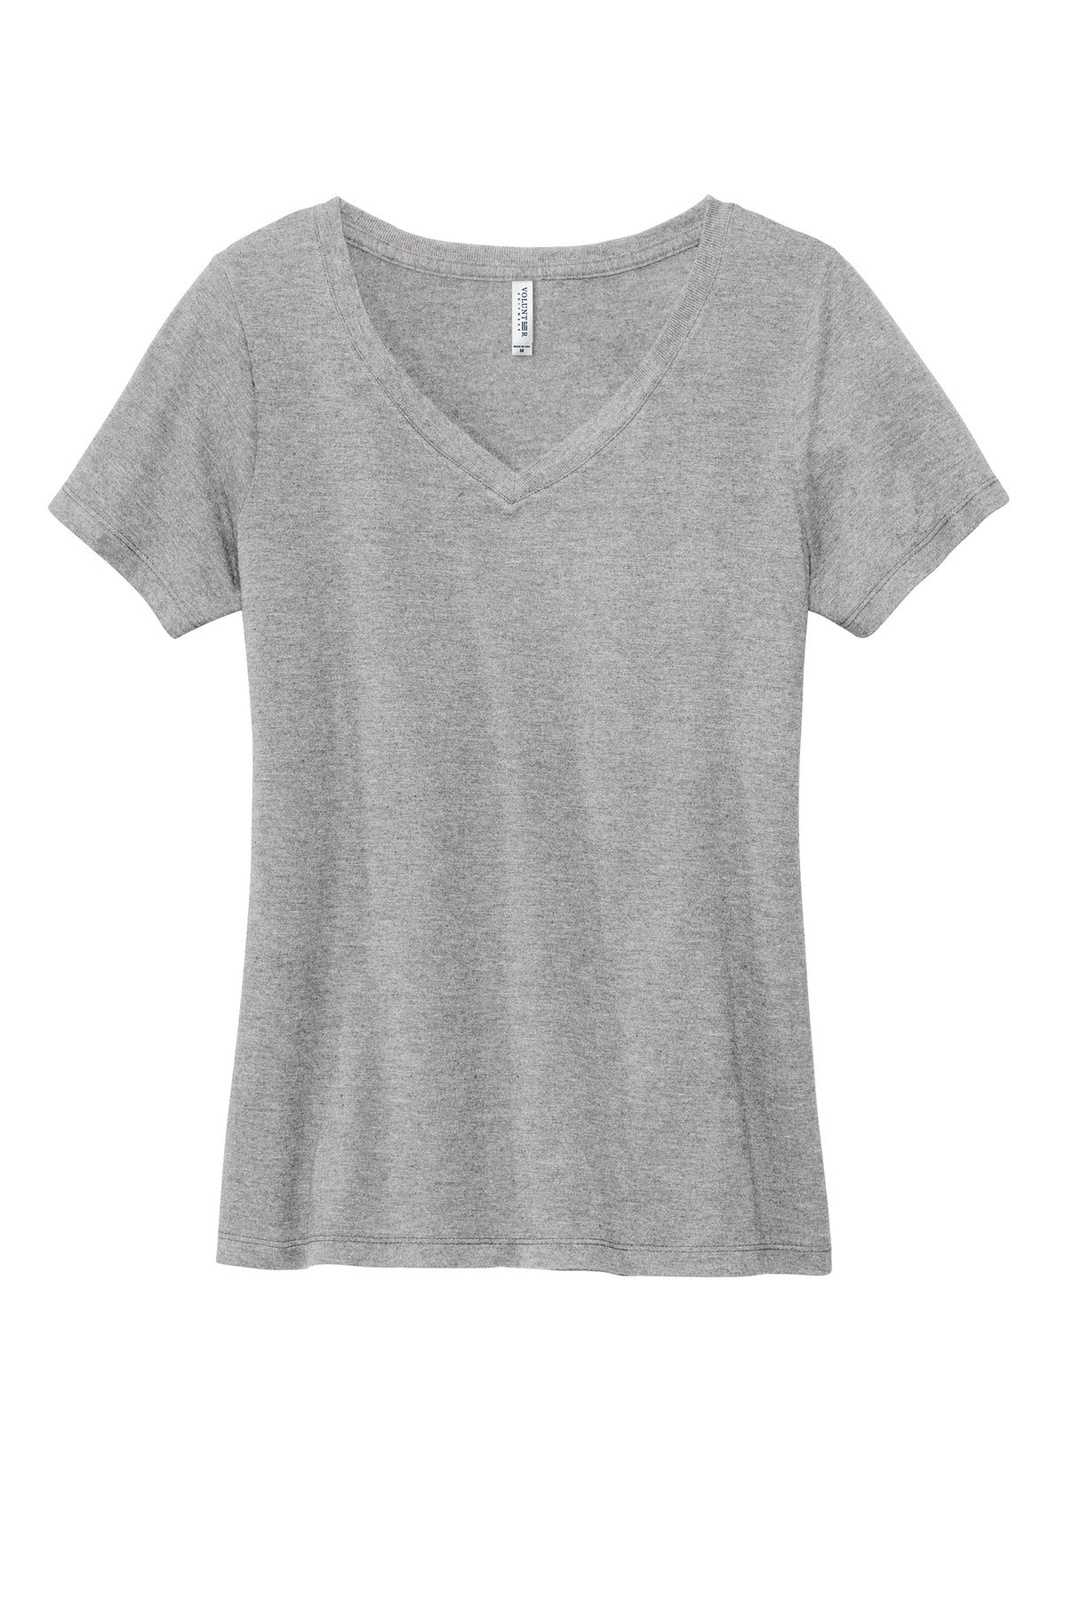 Volunteer Knitwear LVL45V Women's Daily V-Neck Tee - Athletic Heather - HIT a Double - 1